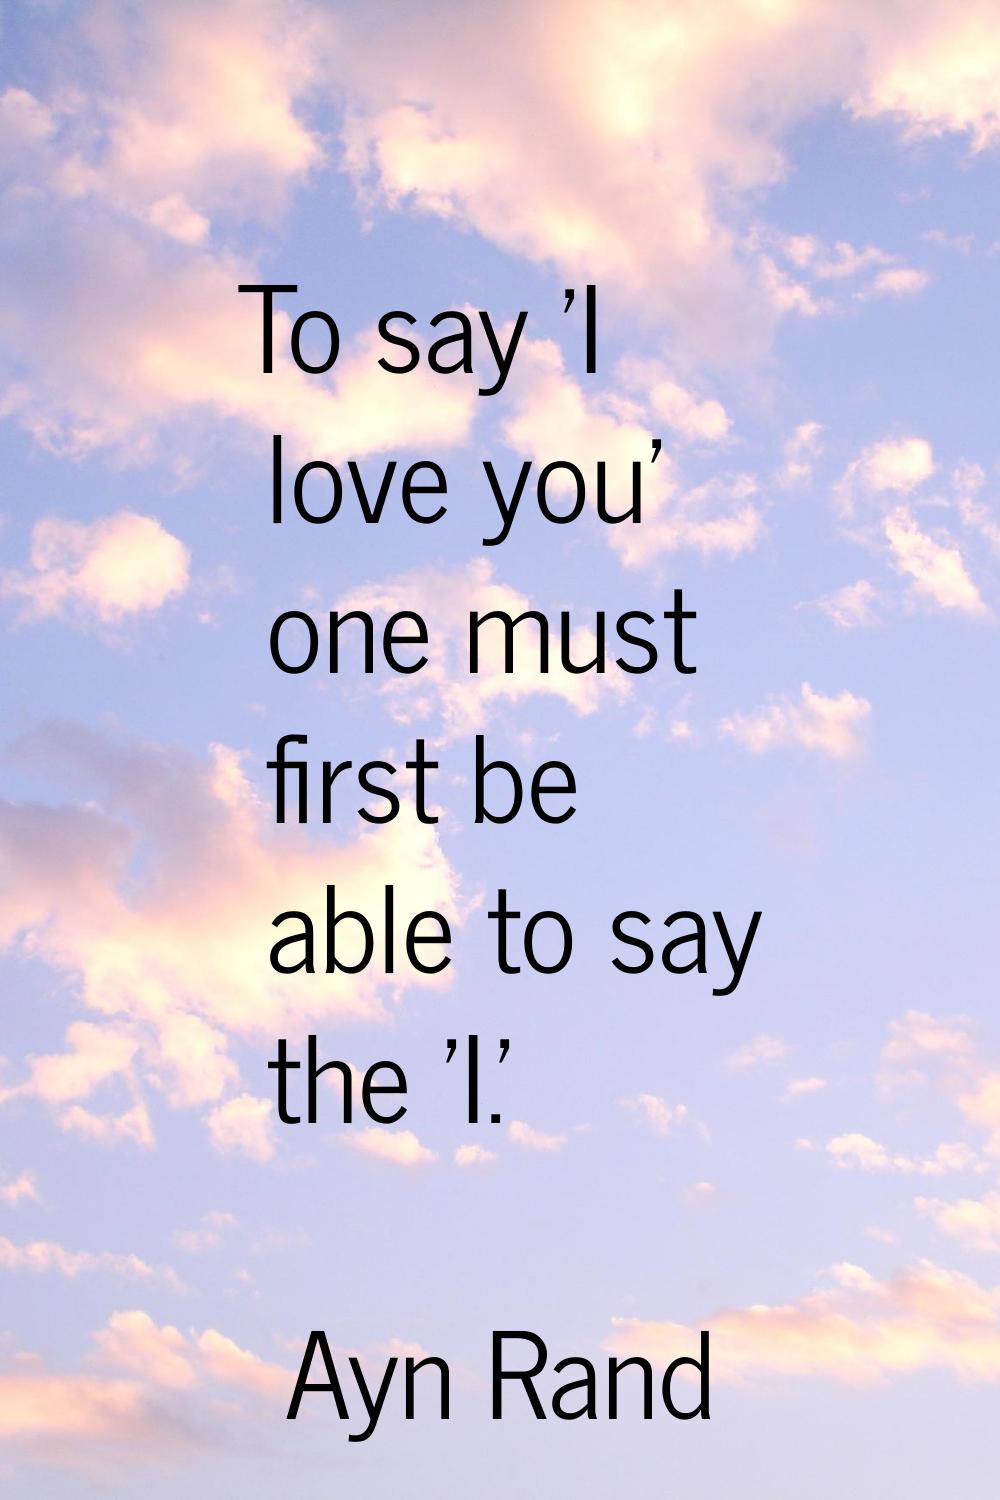 To say 'I love you' one must first be able to say the 'I.'